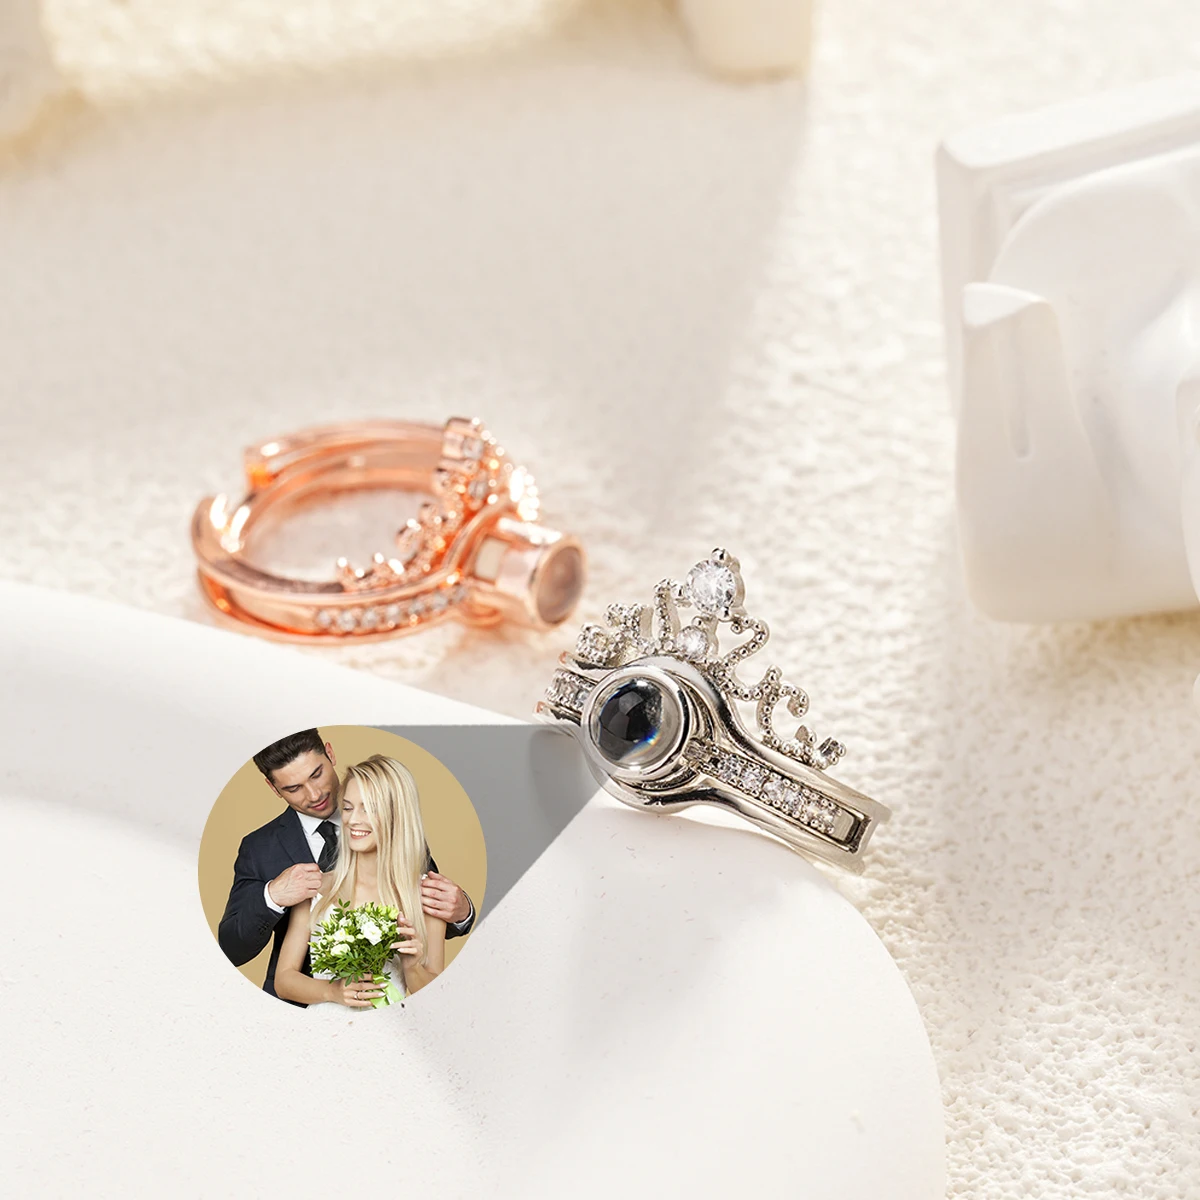 Crystal Crown Photo Custom Image Ring with Your Picture Family Memory Pet Personalized Projection Rings Valentine's Day Gift sr2578 12p yumo slip ring 12 rings 10a electrical contacts with ce certificated capsule slip ring